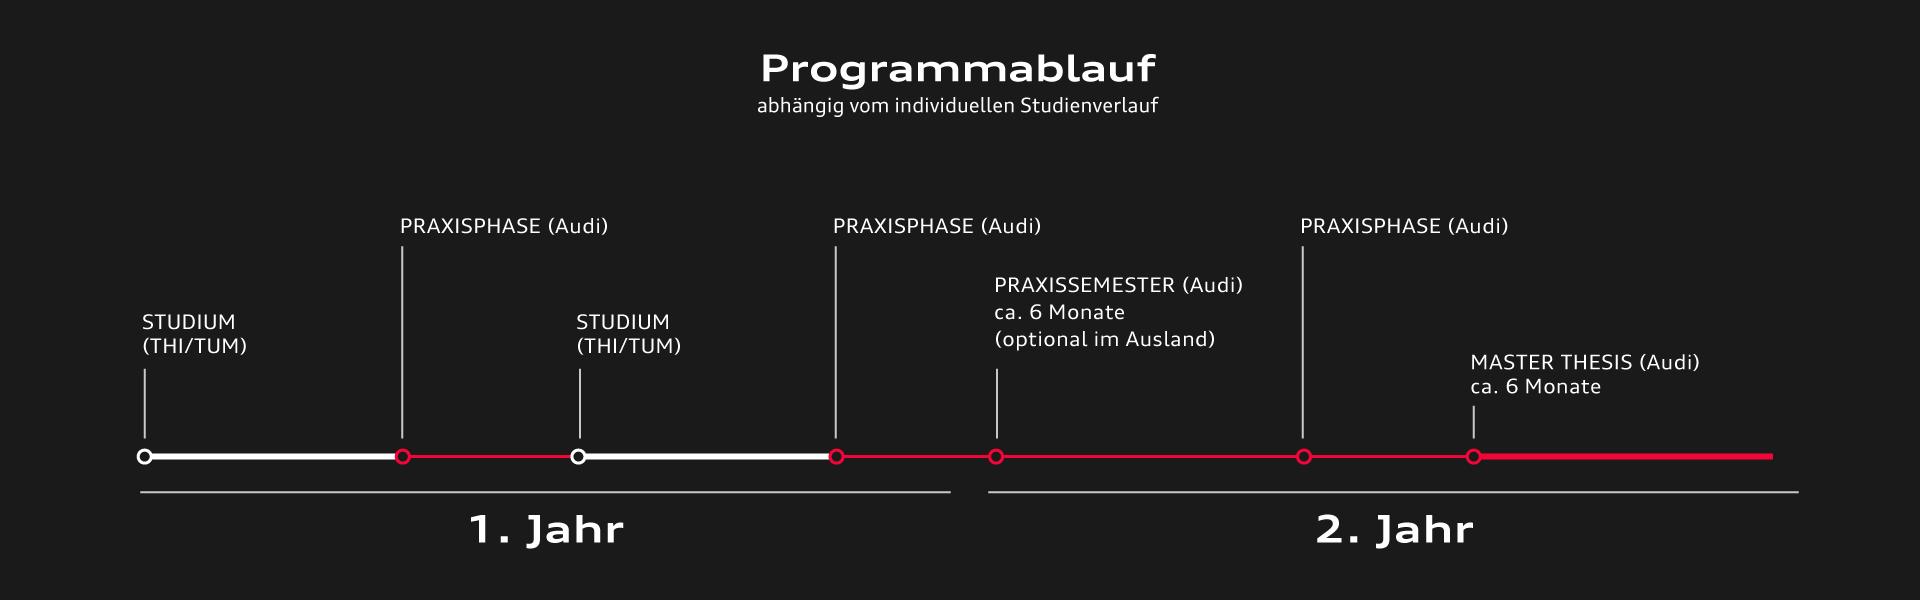 The programme of Audi's dual Master's degree course at the university is presented